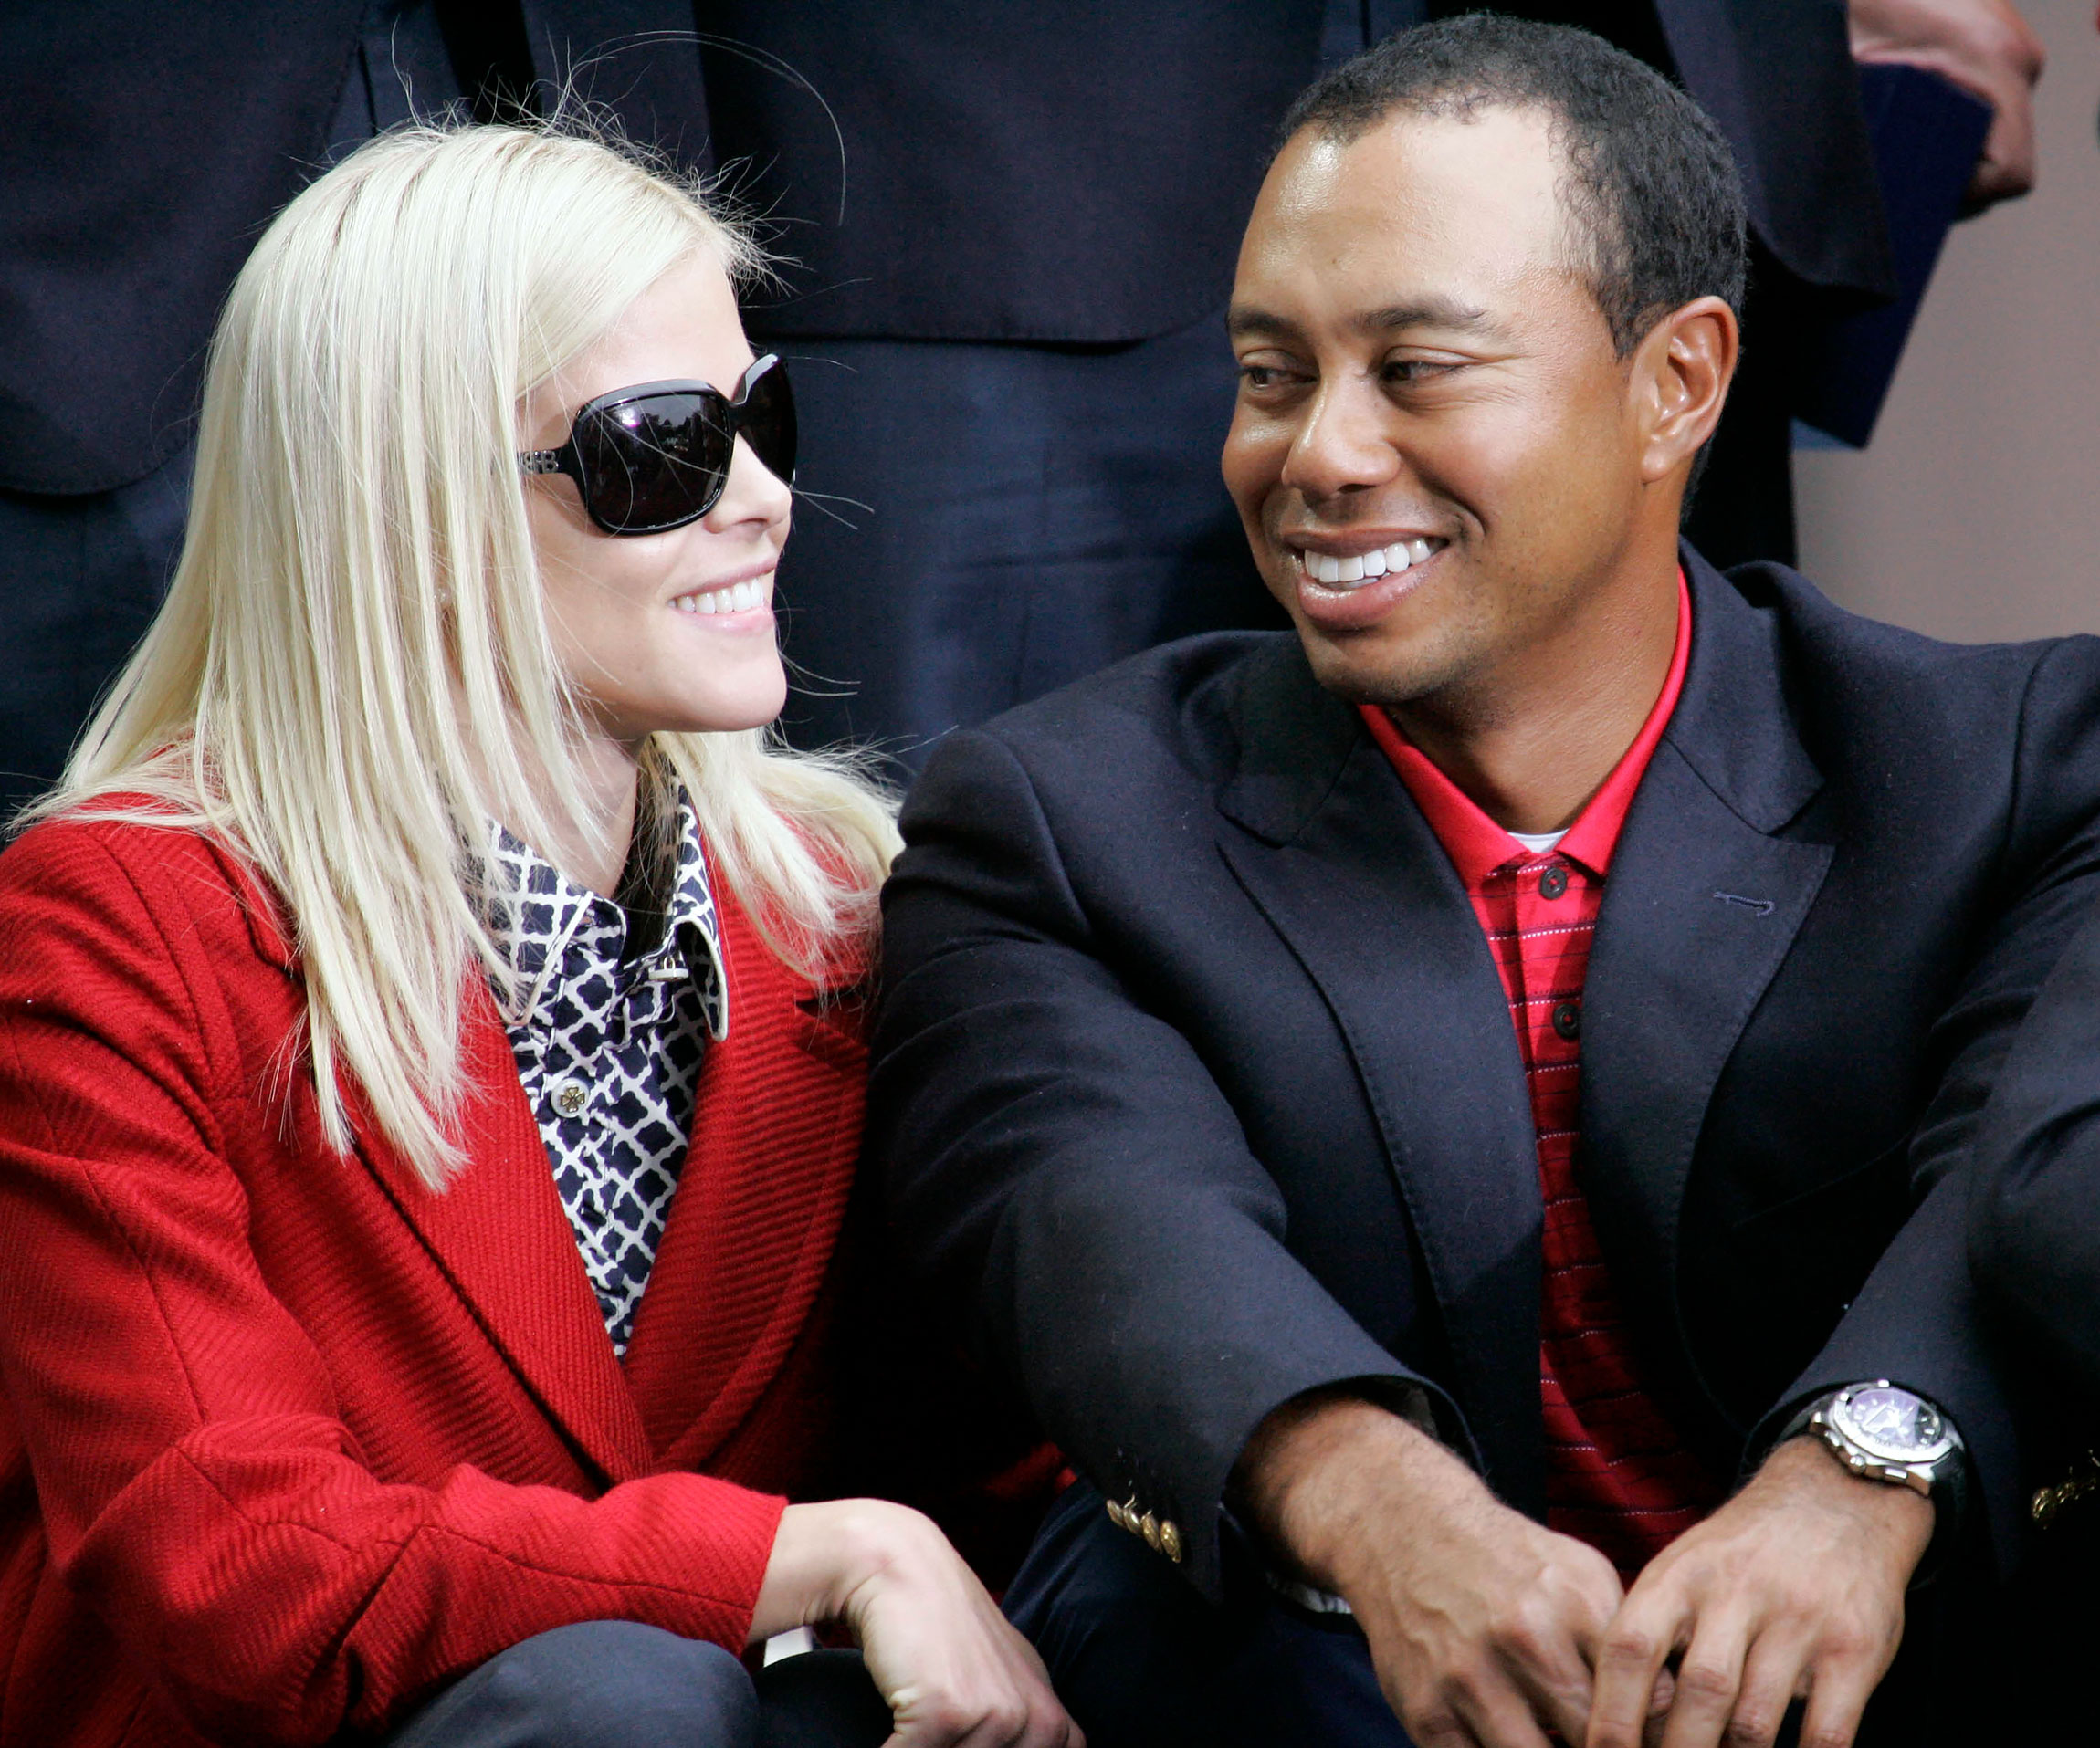 Tiger Woods, Elin Nordegren How They Got Over Scandal to Coparent